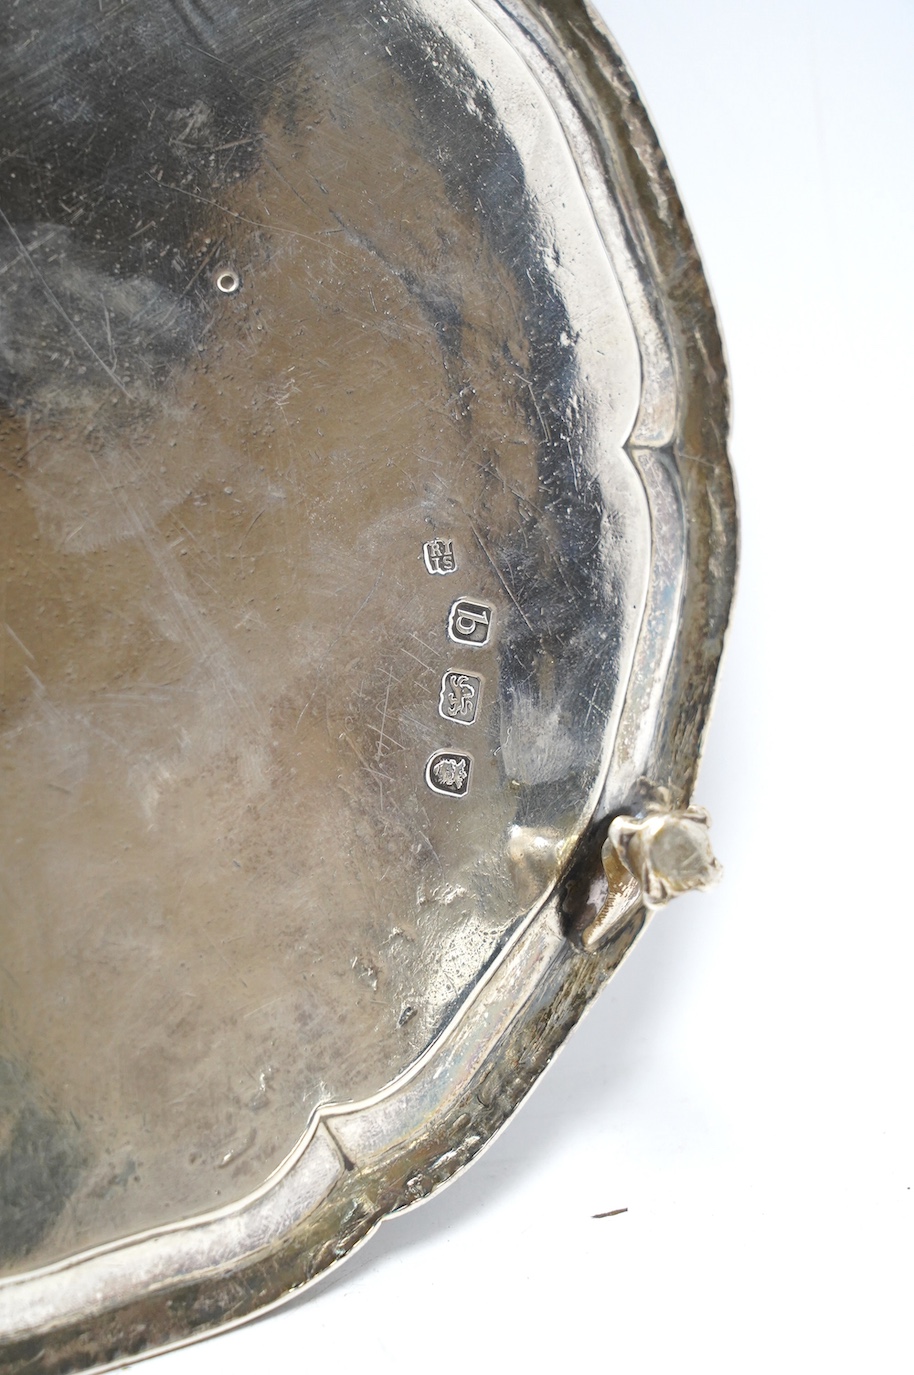 A George III silver waiter, by Jones & Scofield, London, 1777, with beaded border, on three claw and ball feet, 20.5oz, 13.3oz. Condition - poor